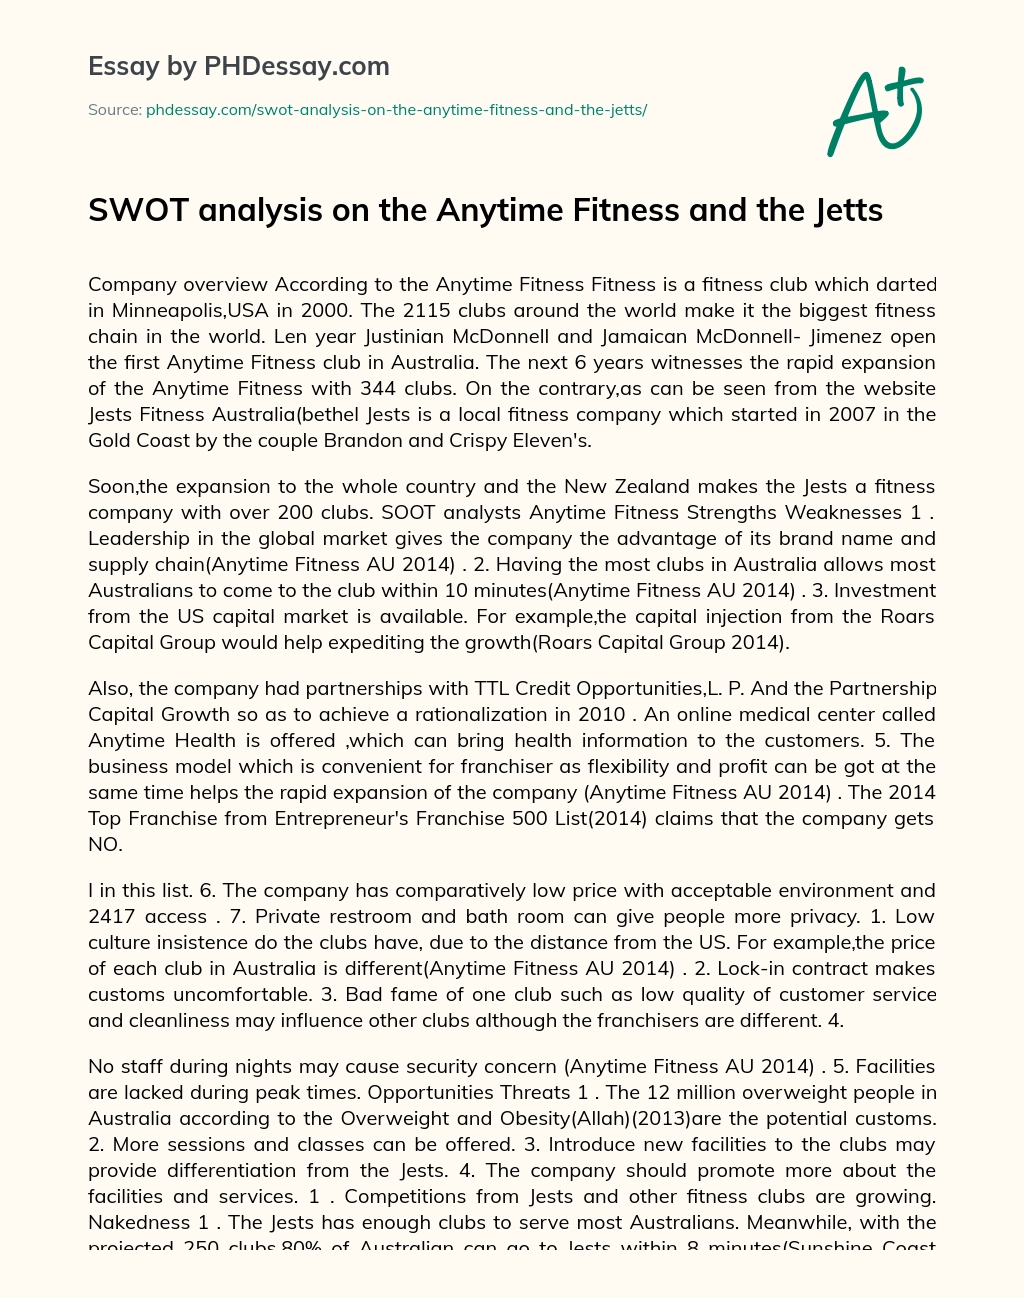 SWOT analysis on the Anytime Fitness and the Jetts essay